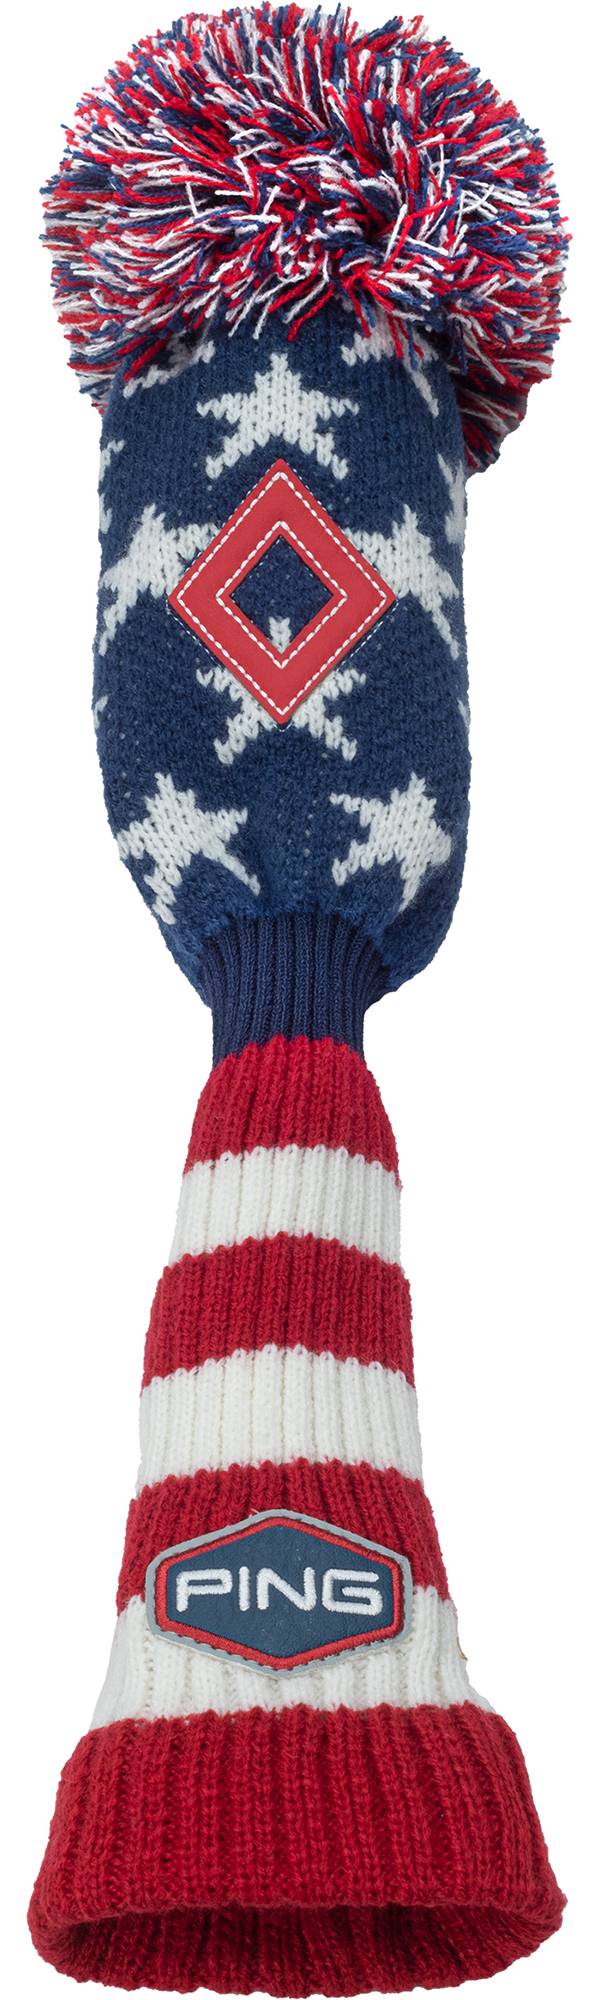 PING Liberty Knit Fairway Wood Headcover product image